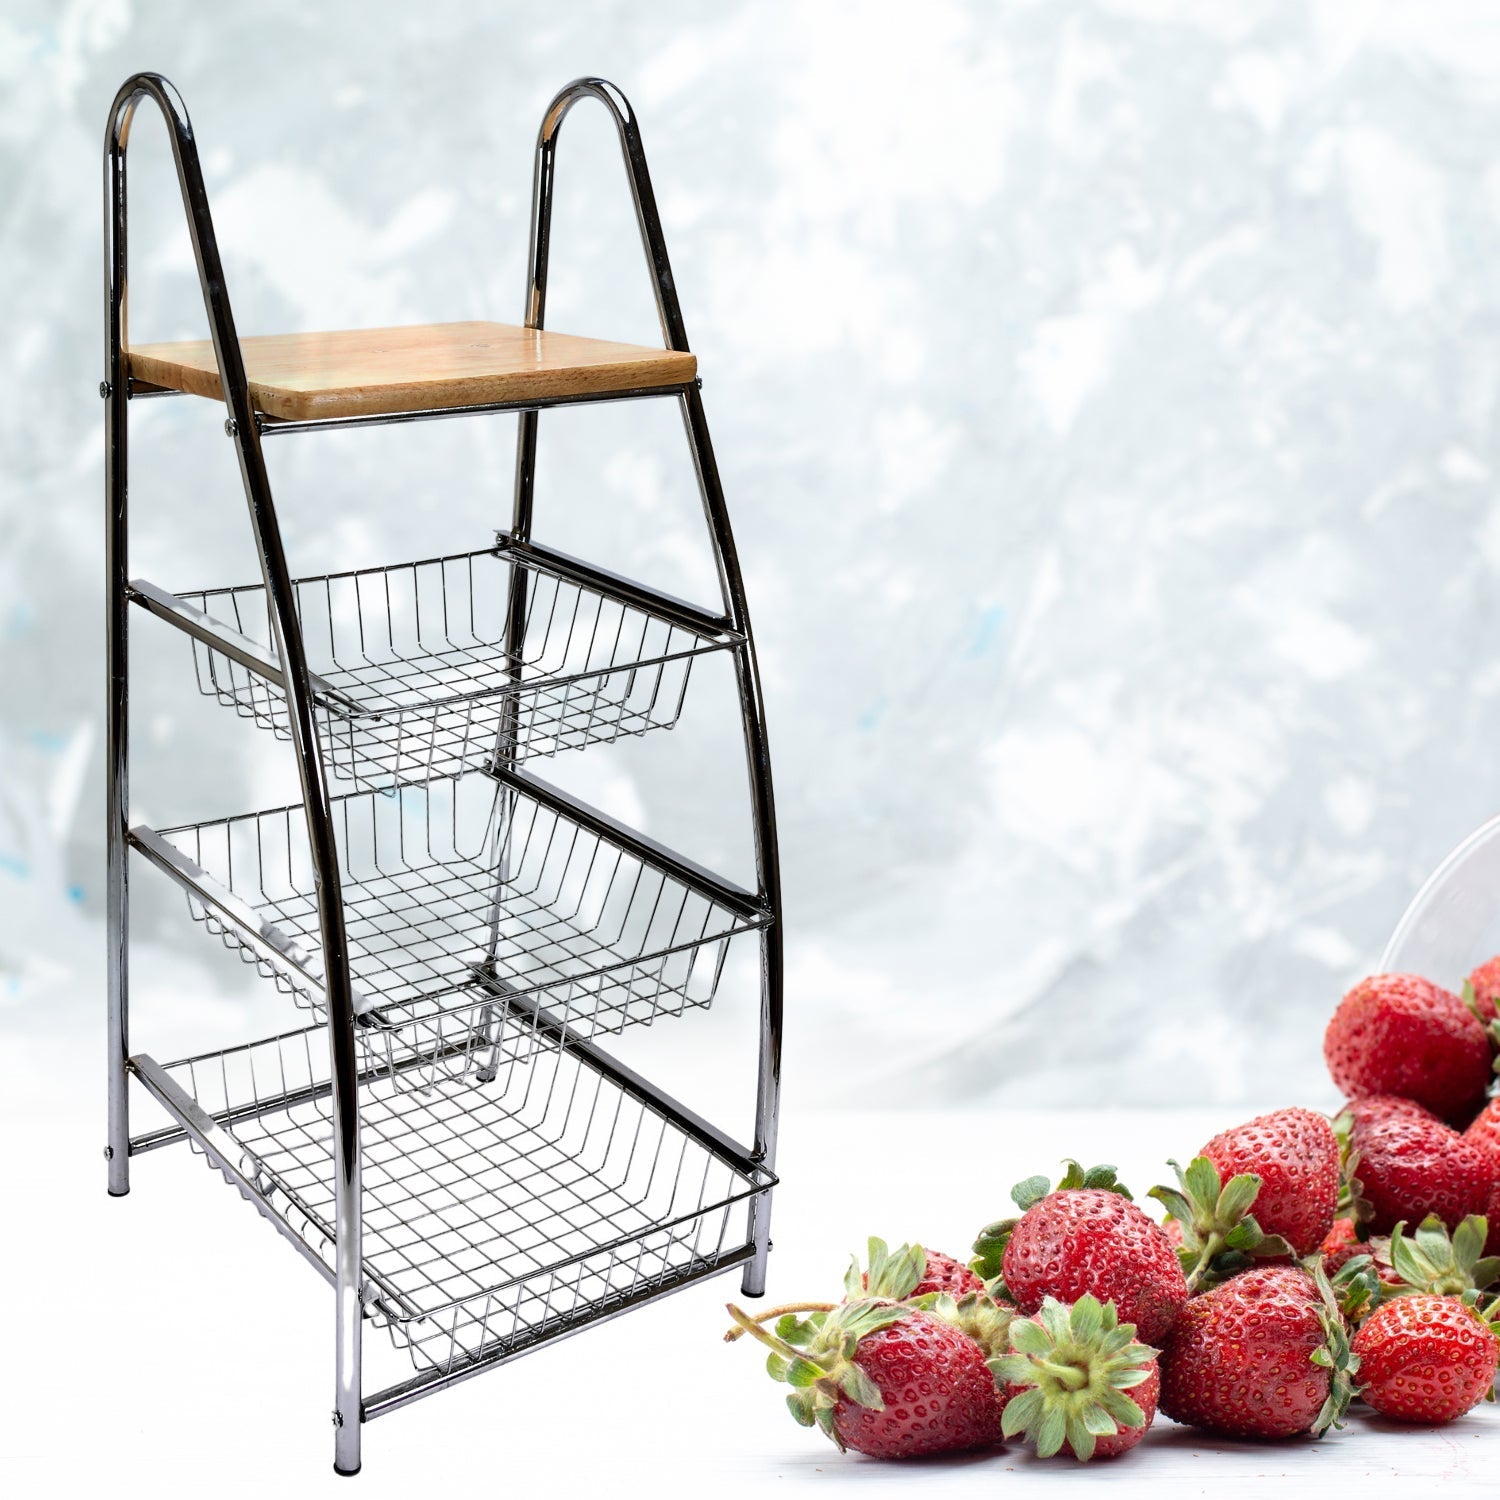 7669 Tkolley Steal High Quality Rack 3 Tier For Kitchen Use DeoDap